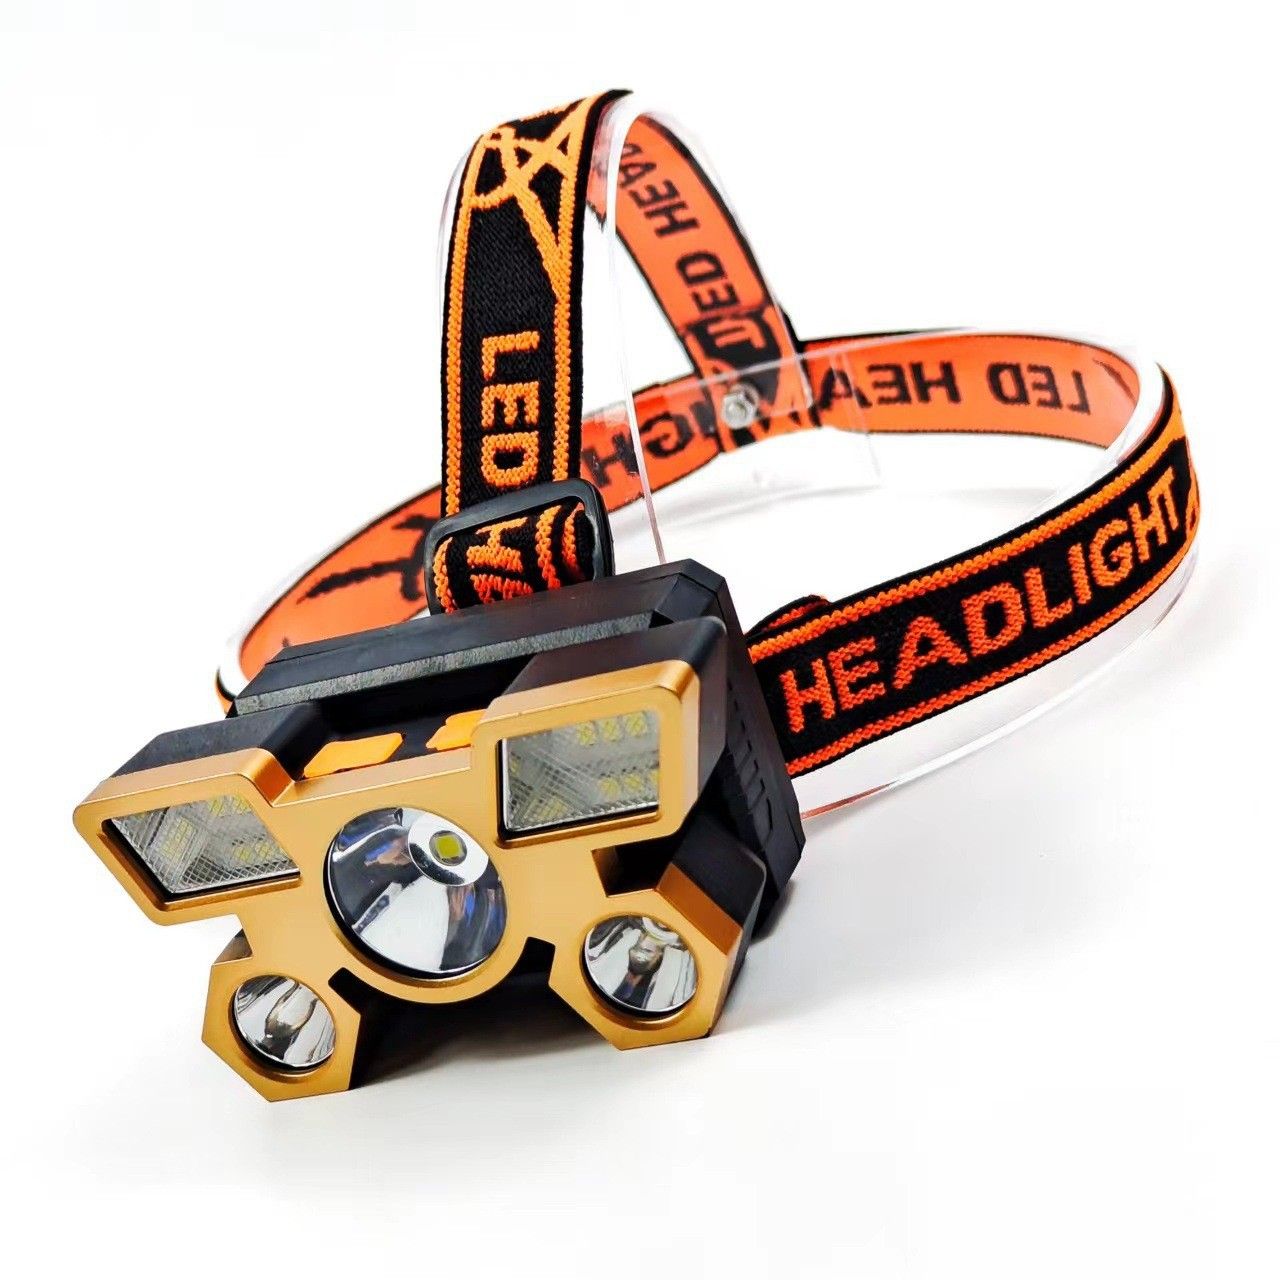 LED Headlights USB Rechargeable Waterproof LED Headlamp For Outdoor Camping Adventure